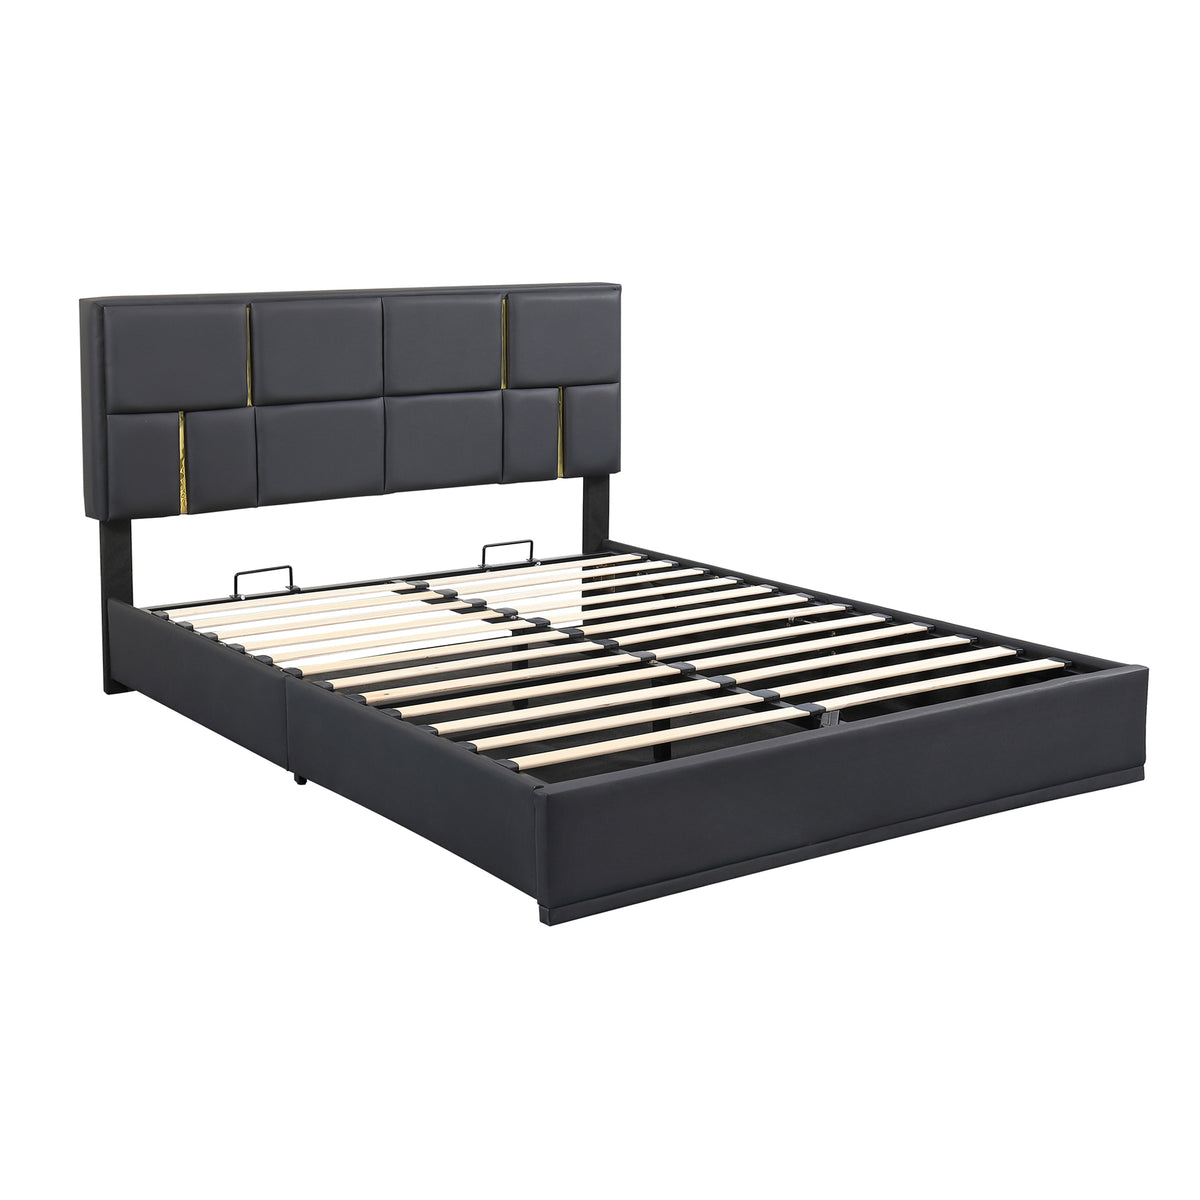 2-Pieces Bedroom Sets,Queen Size Upholstered Platform Bed with Hydraulic Storage System,Storage Ottoman with Metal Legs,Black